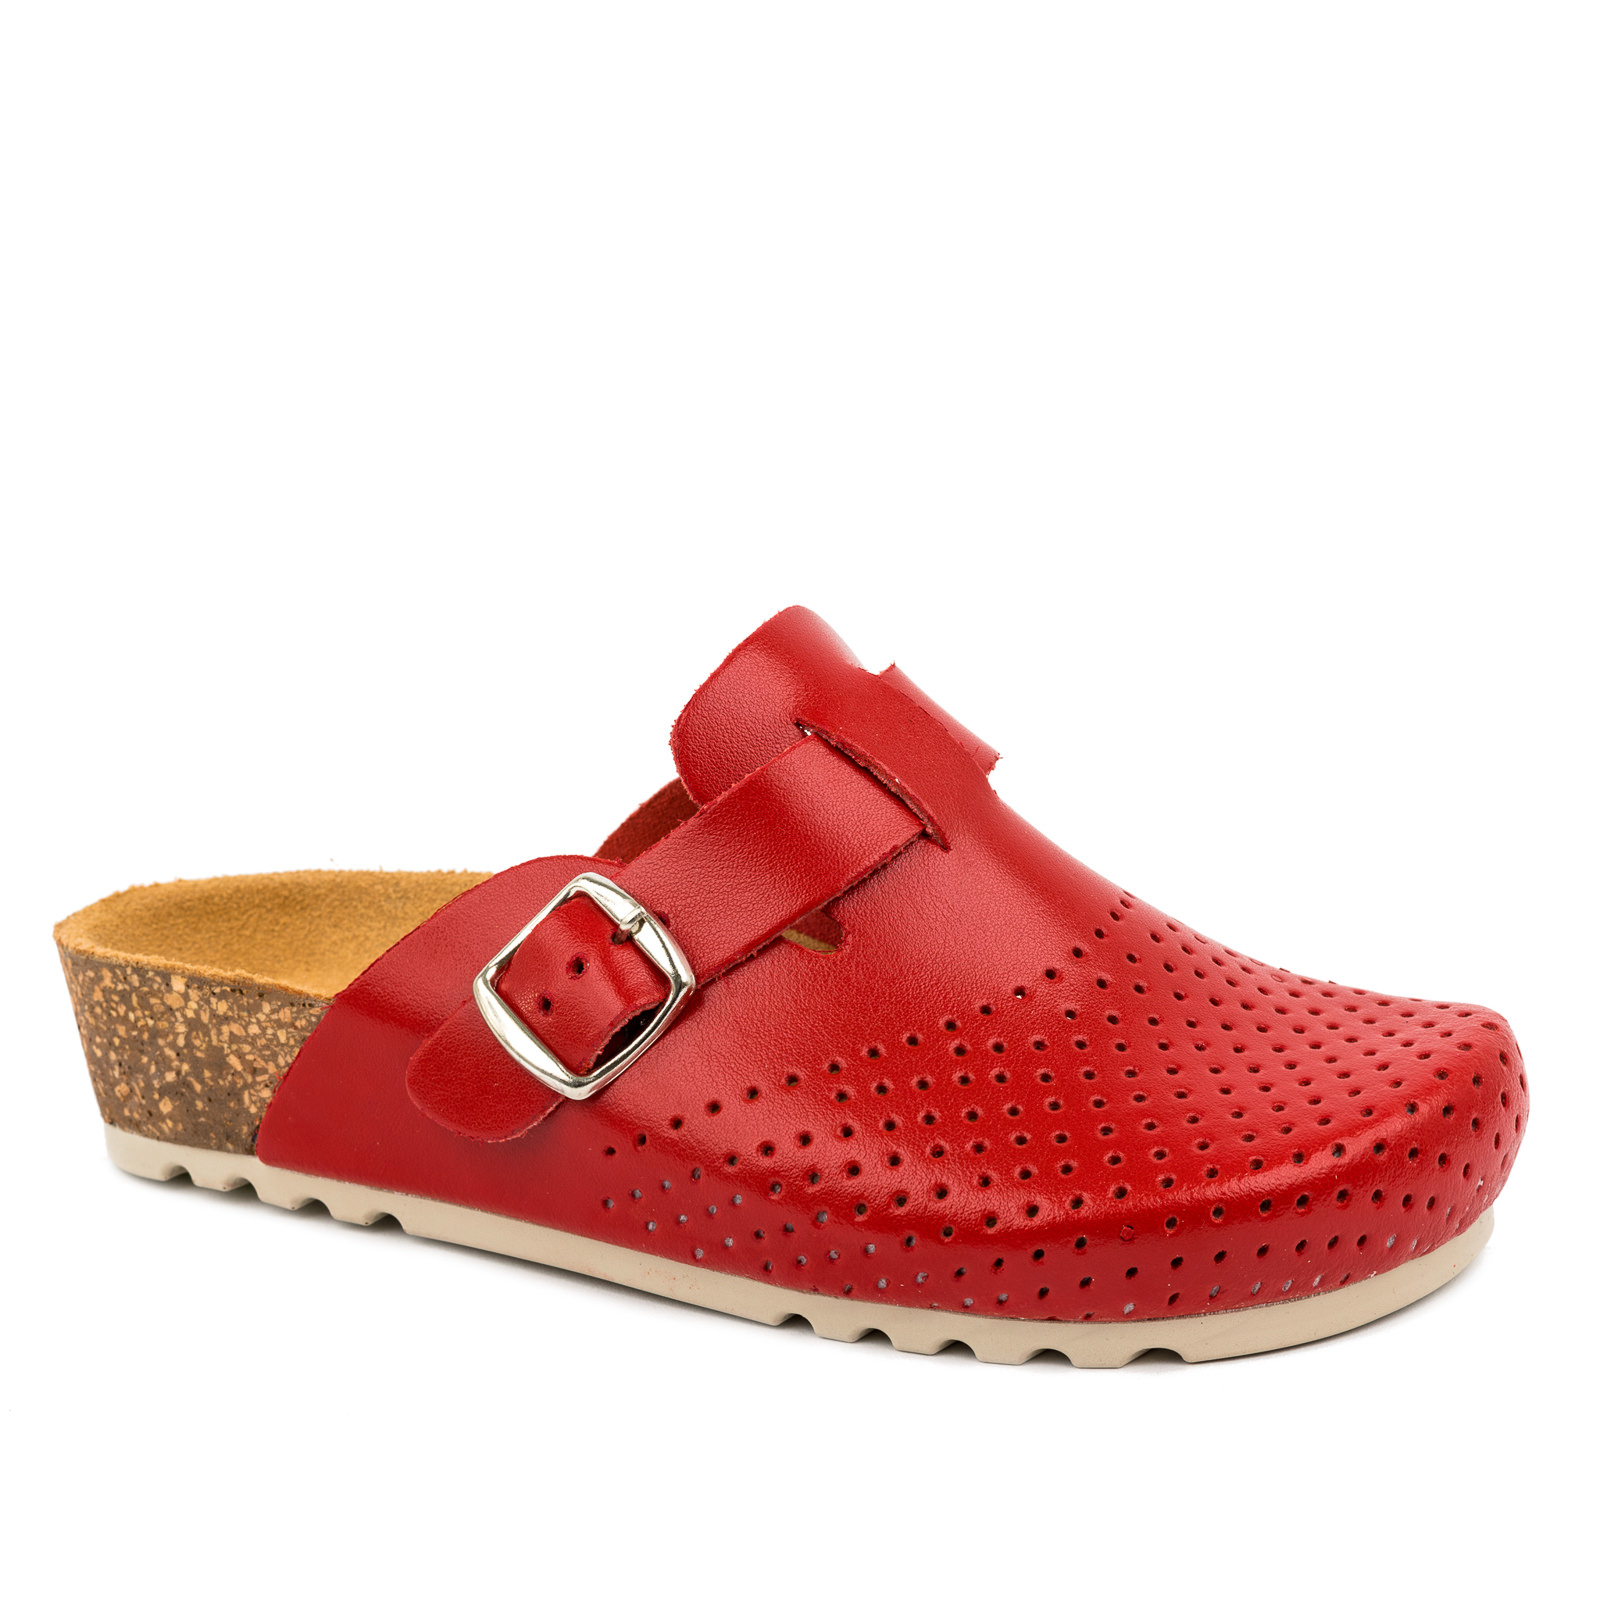 LEATHER ANATOMIC CLOGS WITH BELT - RED